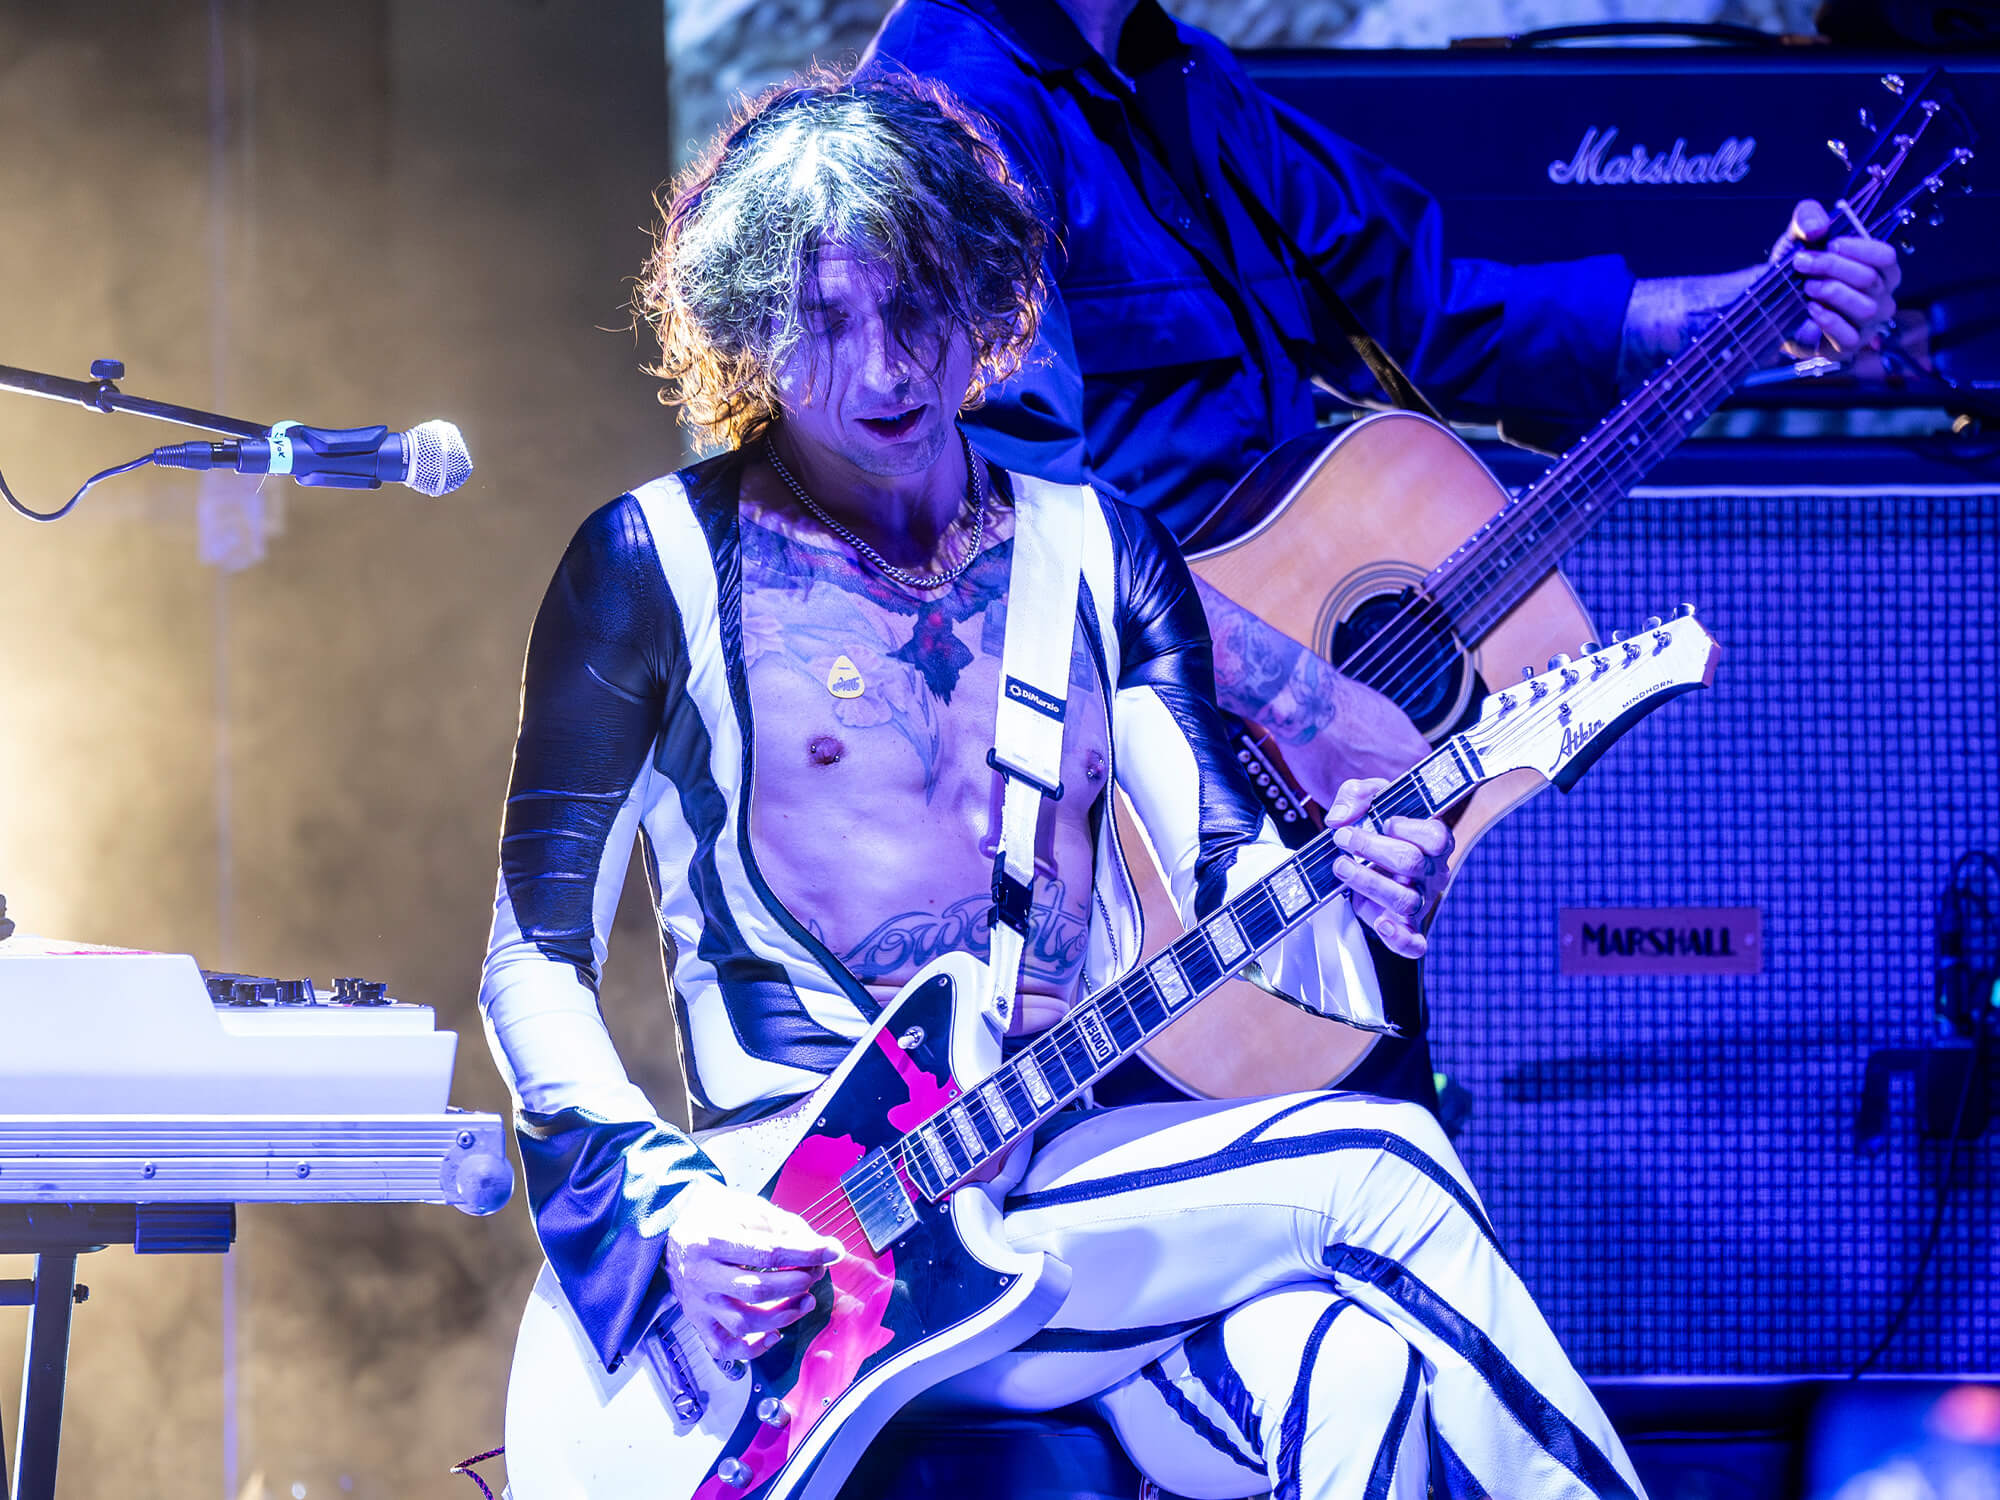 Justin Hawkins on stage. He is playing guitar and sitting with one leg crossed over the other. The lighting around him is blue, and he is wearing a striped one-piece outfit with flared sleeves and trouser legs.